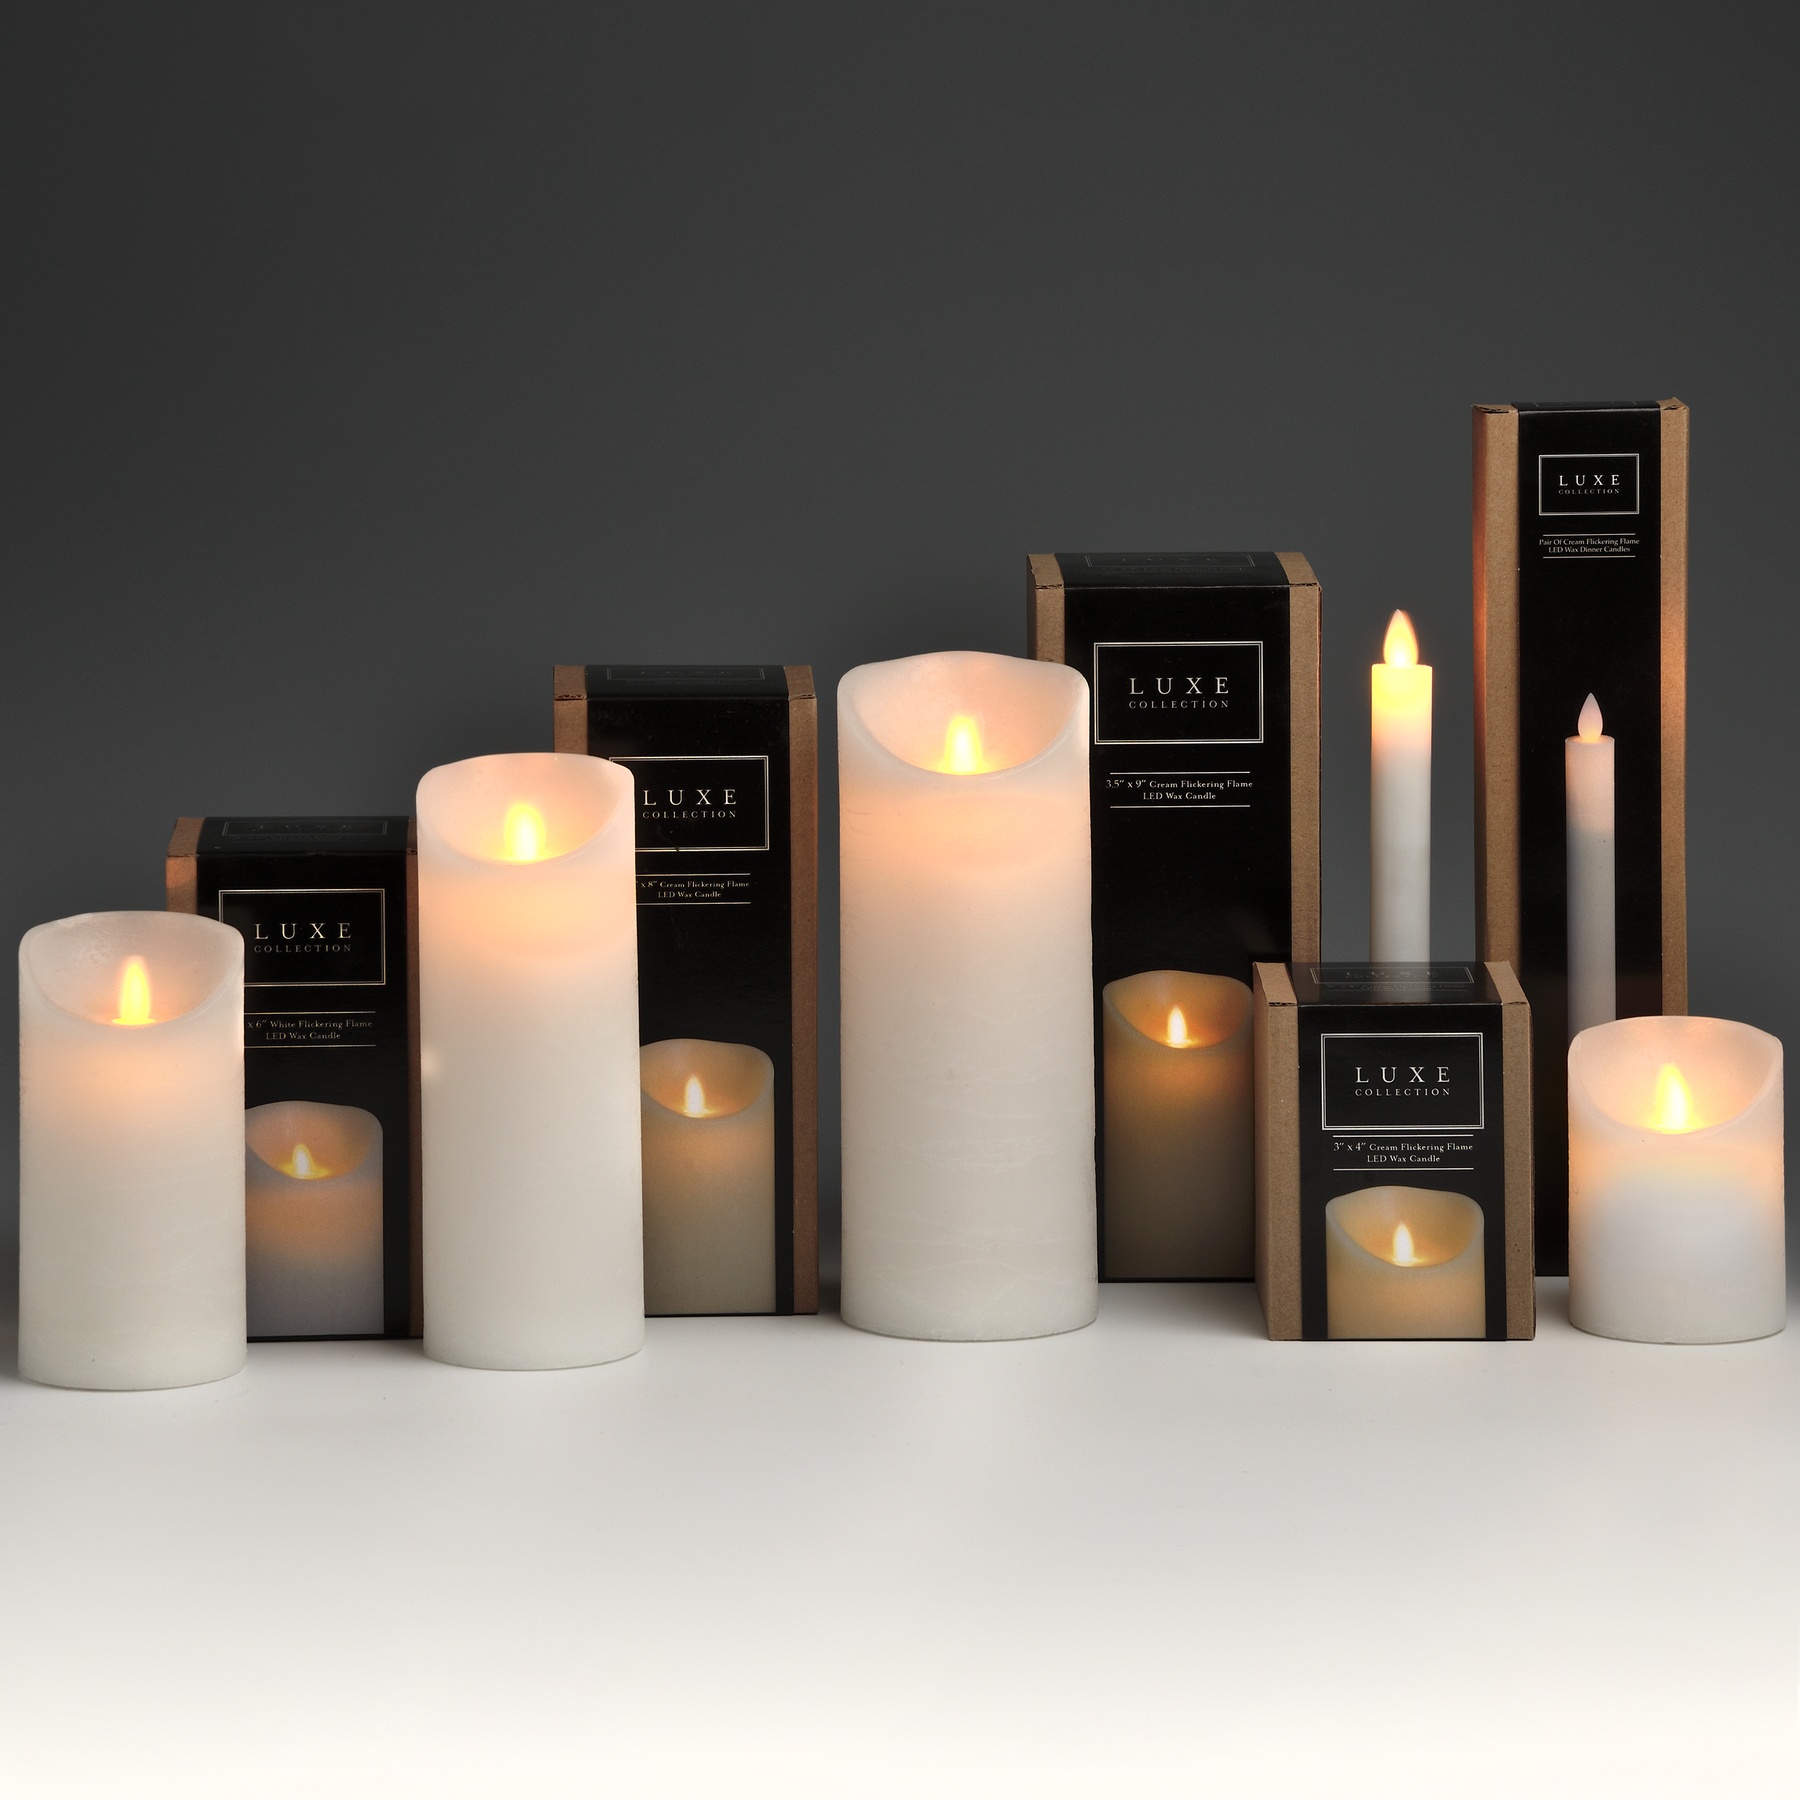 Silver or White Real Wax LED Flickering Flame Pillar Candles20 cmCream 